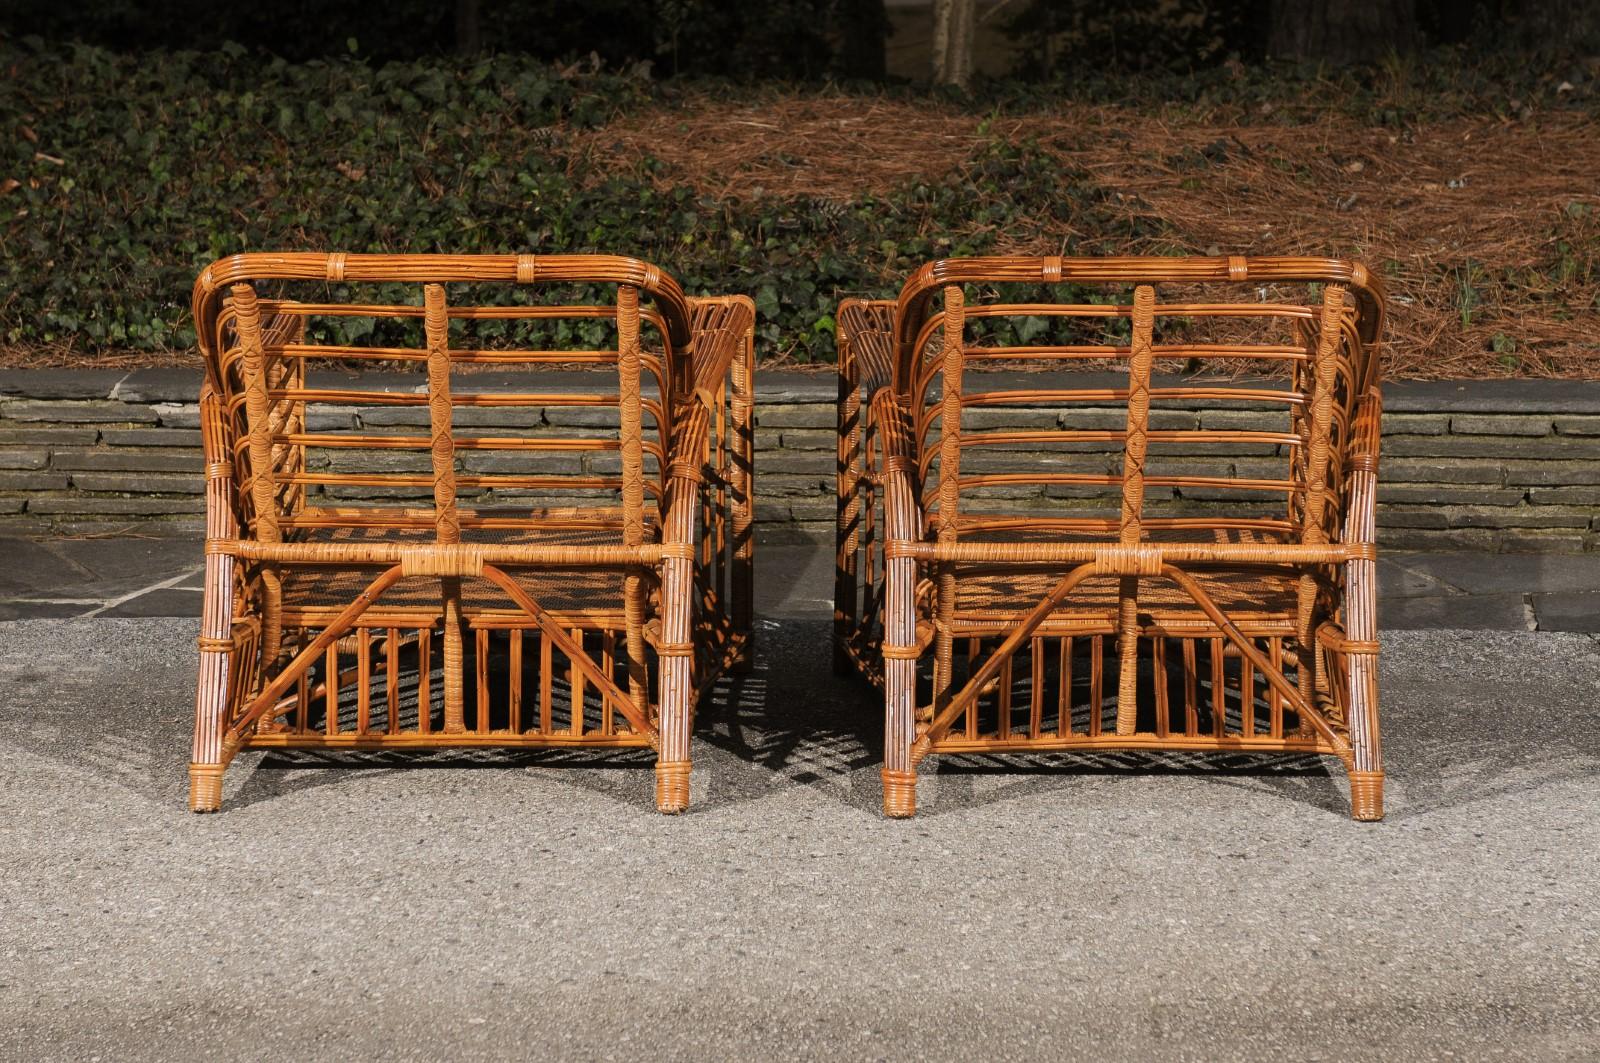 Exquisite Restored Pair of Modern President's Loungers by McGuire, circa 1985 For Sale 4